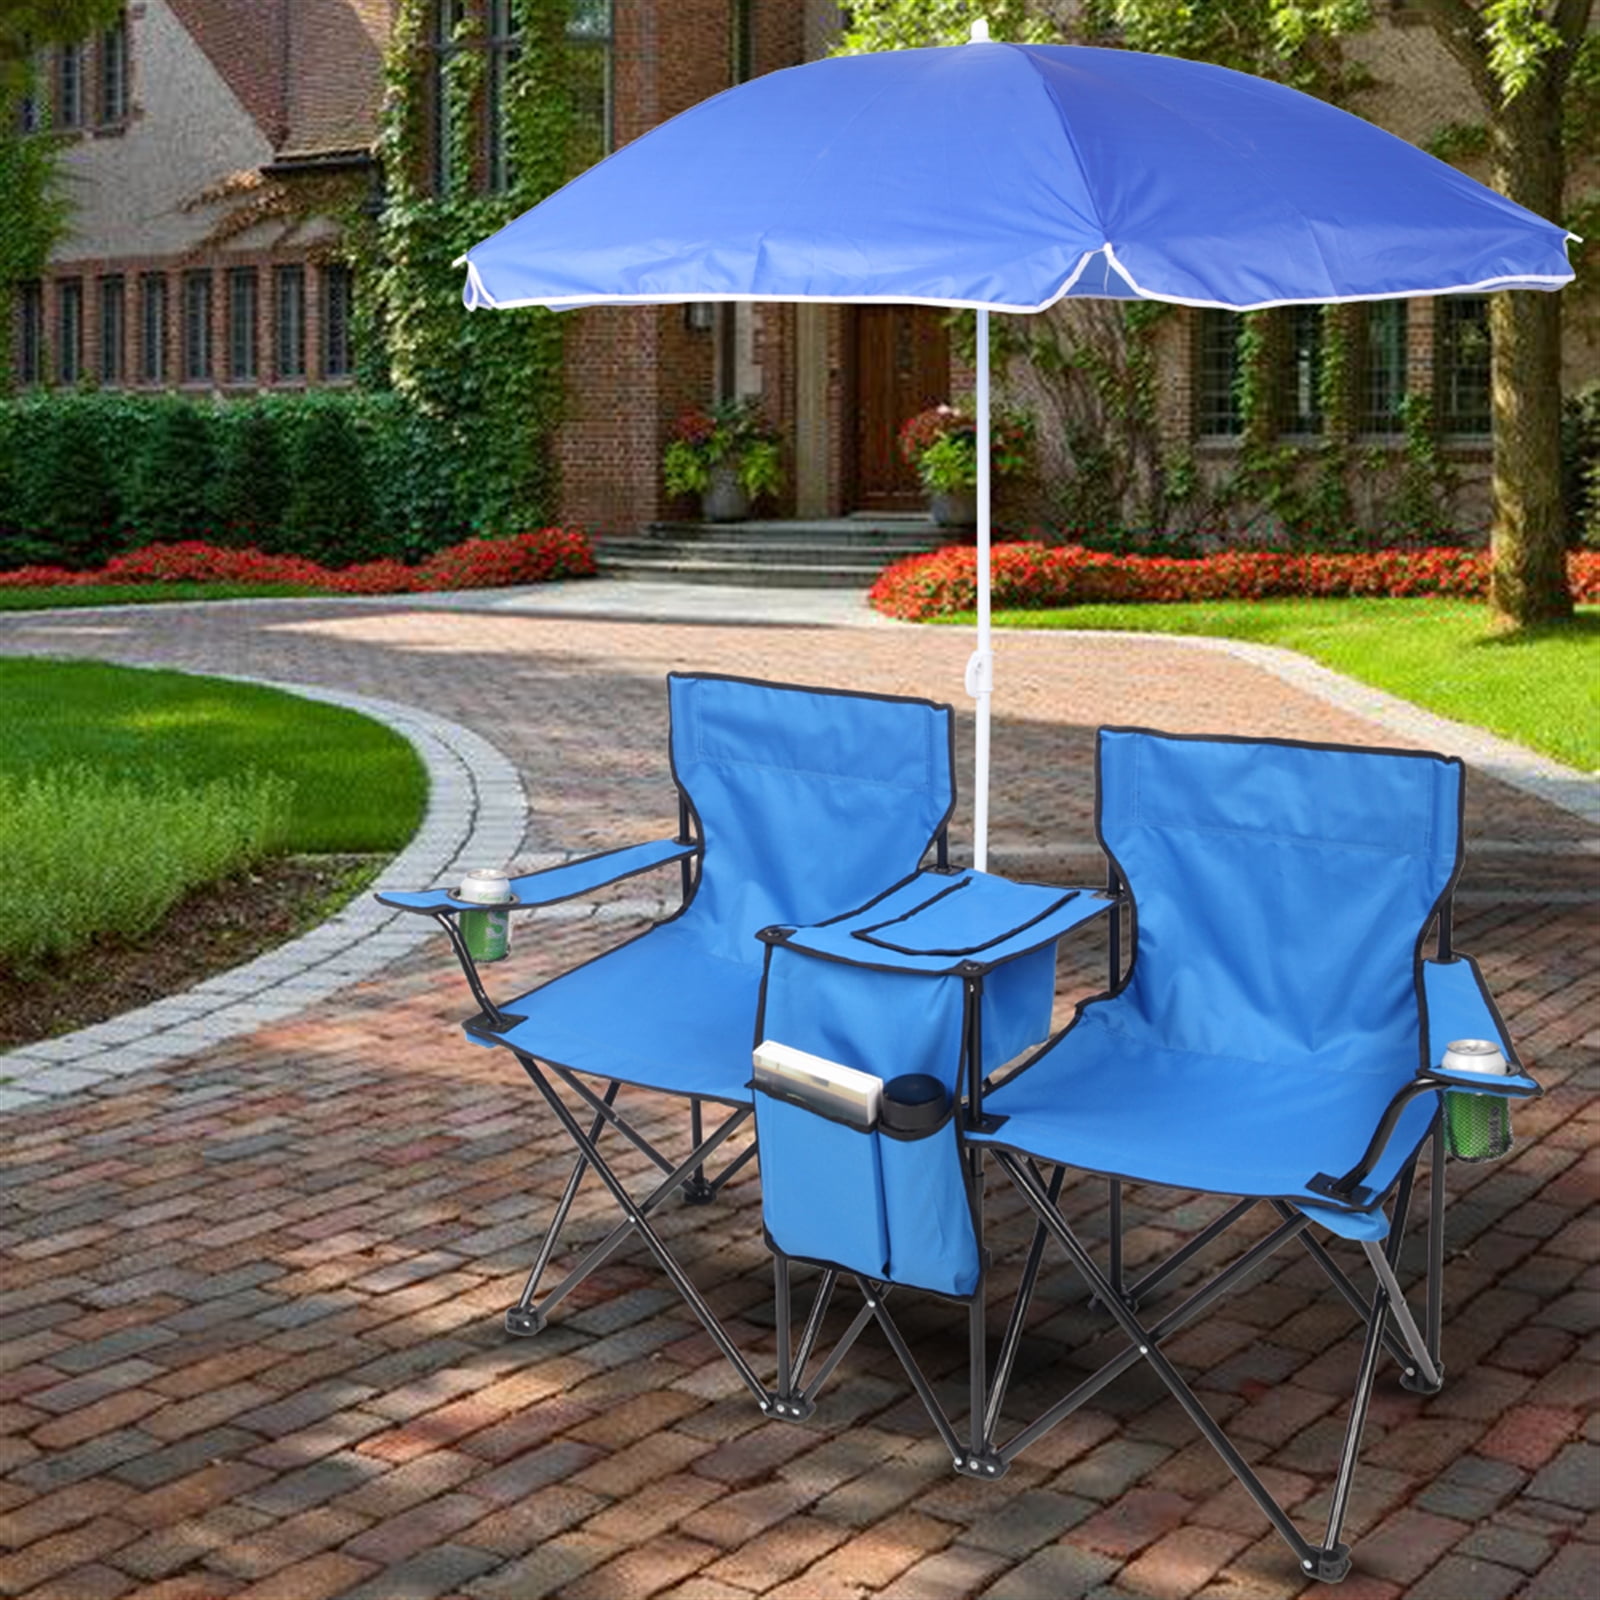 Details about   Camping Portable Outdoor 2-Seat Folding Chair with Removable Sun Umbrella Blue 